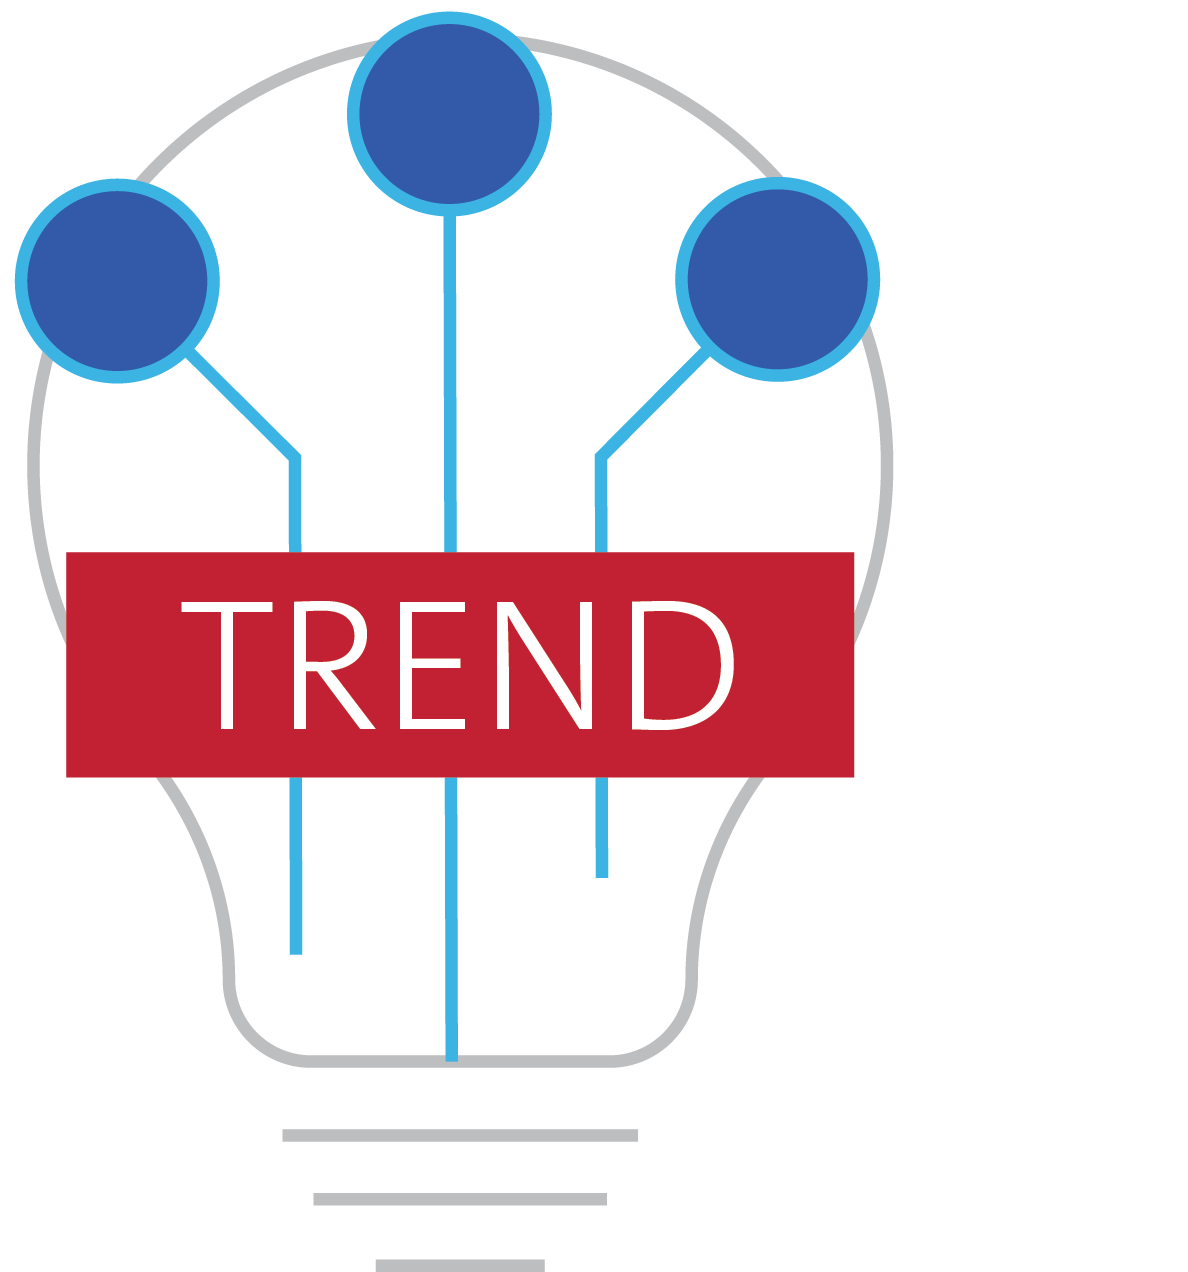 Key trend icon for innovative technology